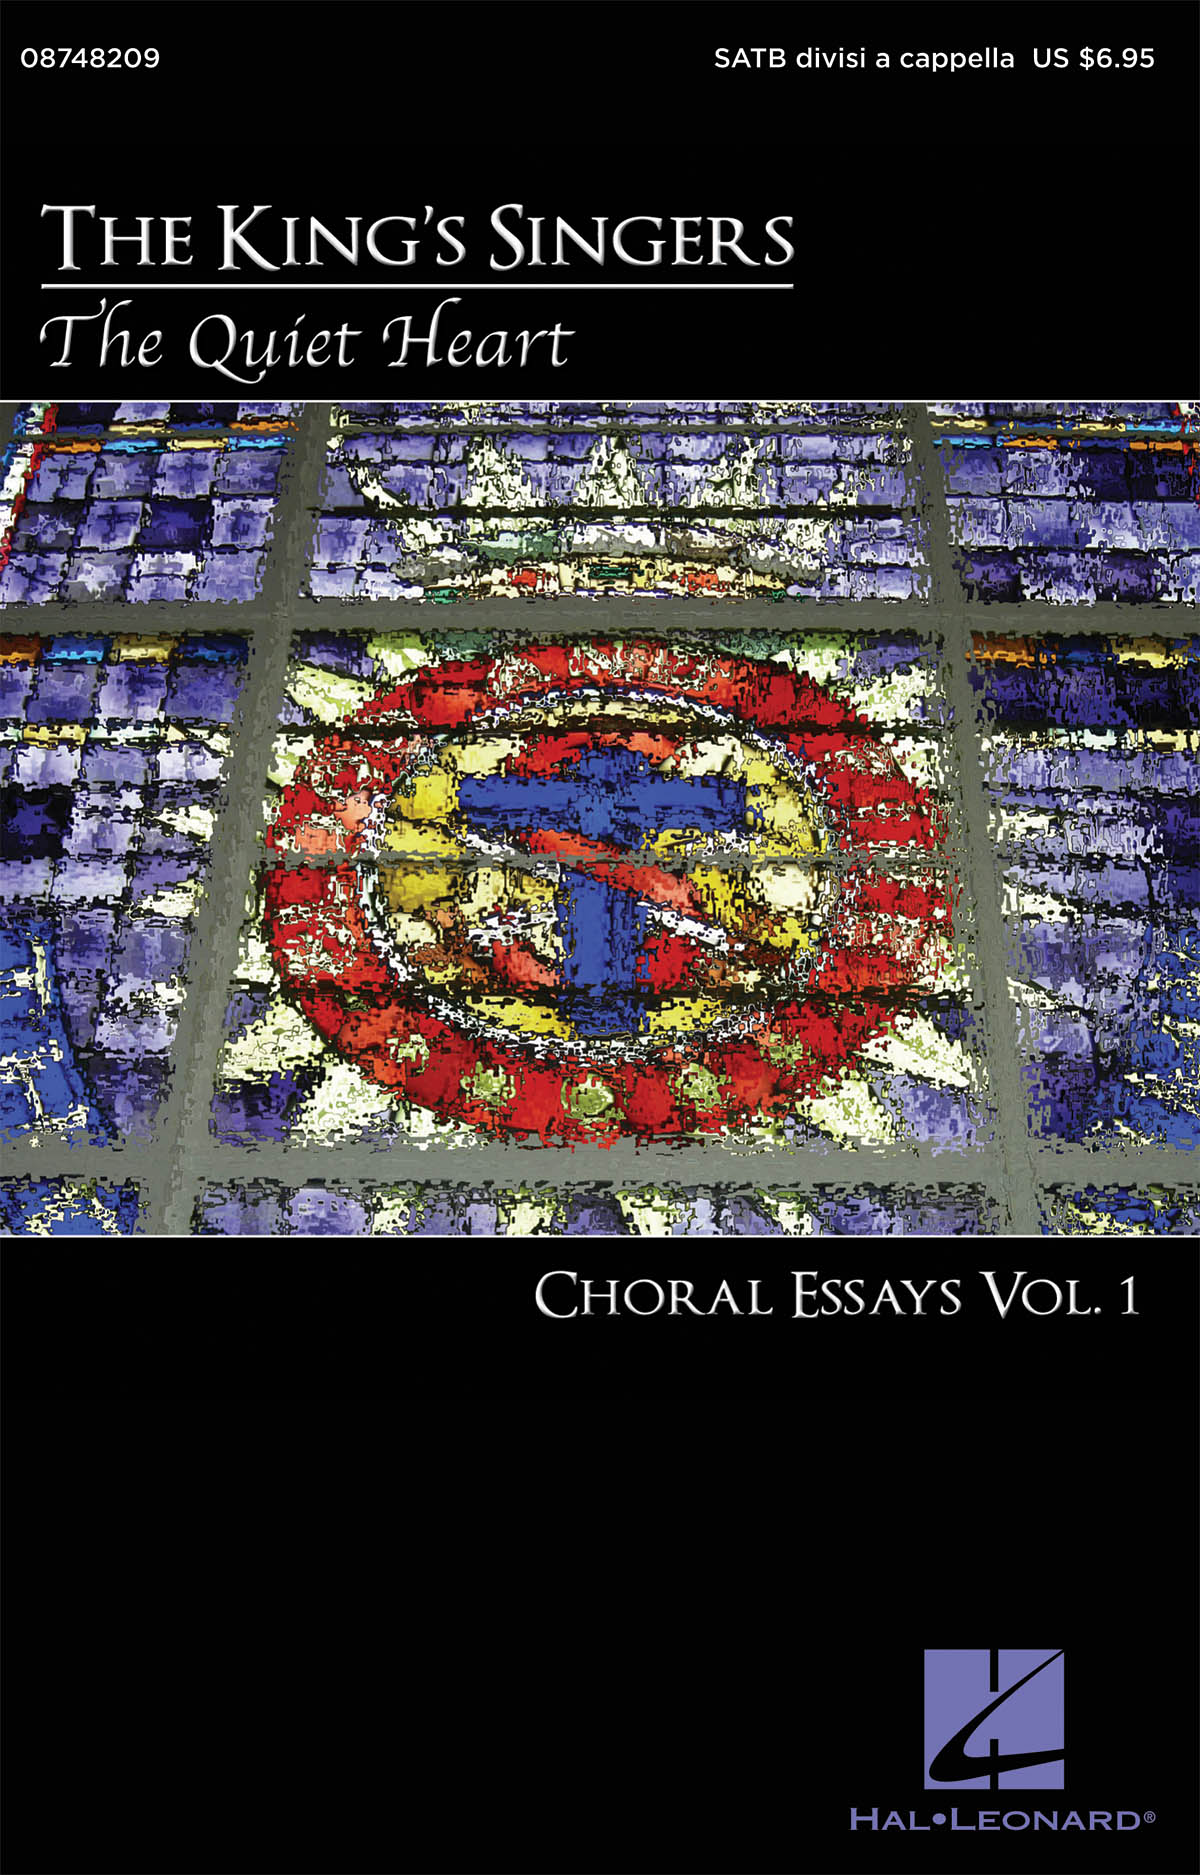 The King's Singers: The Quiet Heart: Choral Essays Volume 1: SATB: Vocal Score